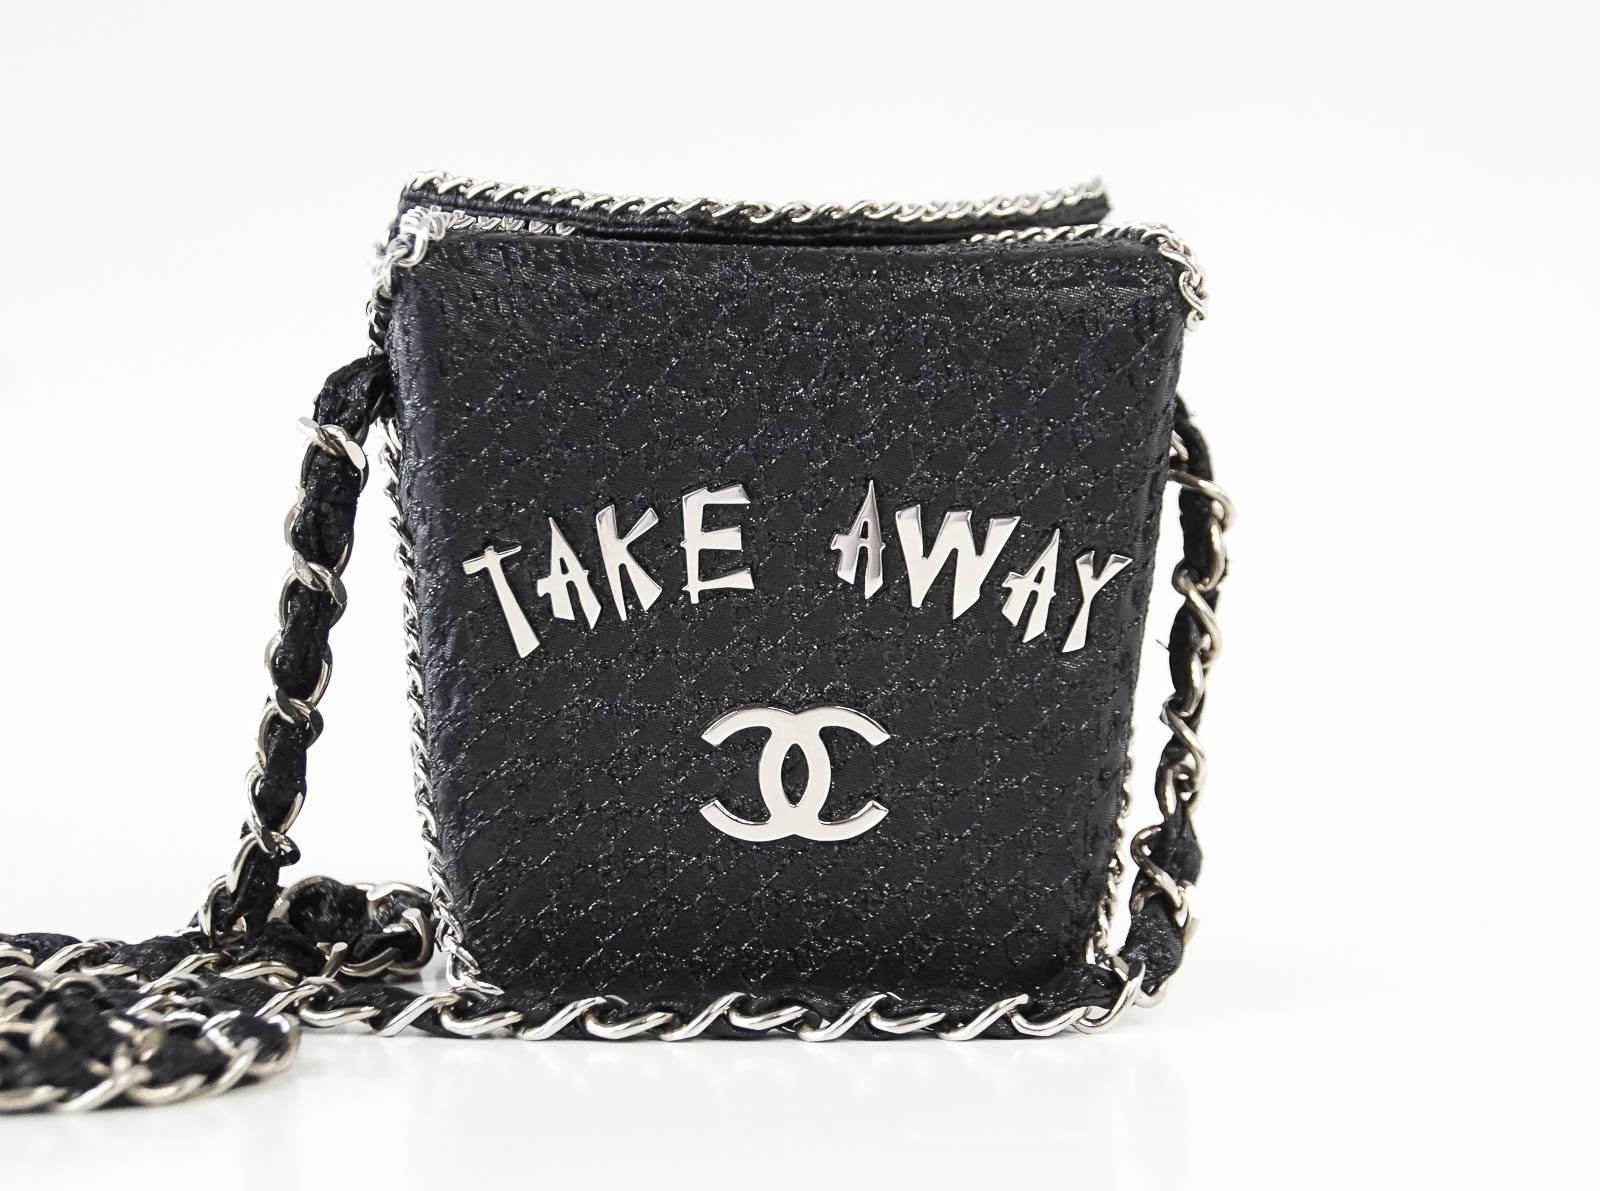 Guaranteed authentic CHANEL very rare Take Away Box bag from the coveted Chanel Shanghai collection.
Metallic fabric finished with classic leather and silver signature chain.
Inspired by Chinese take-away boxes.
Interior has silver logo plaque and